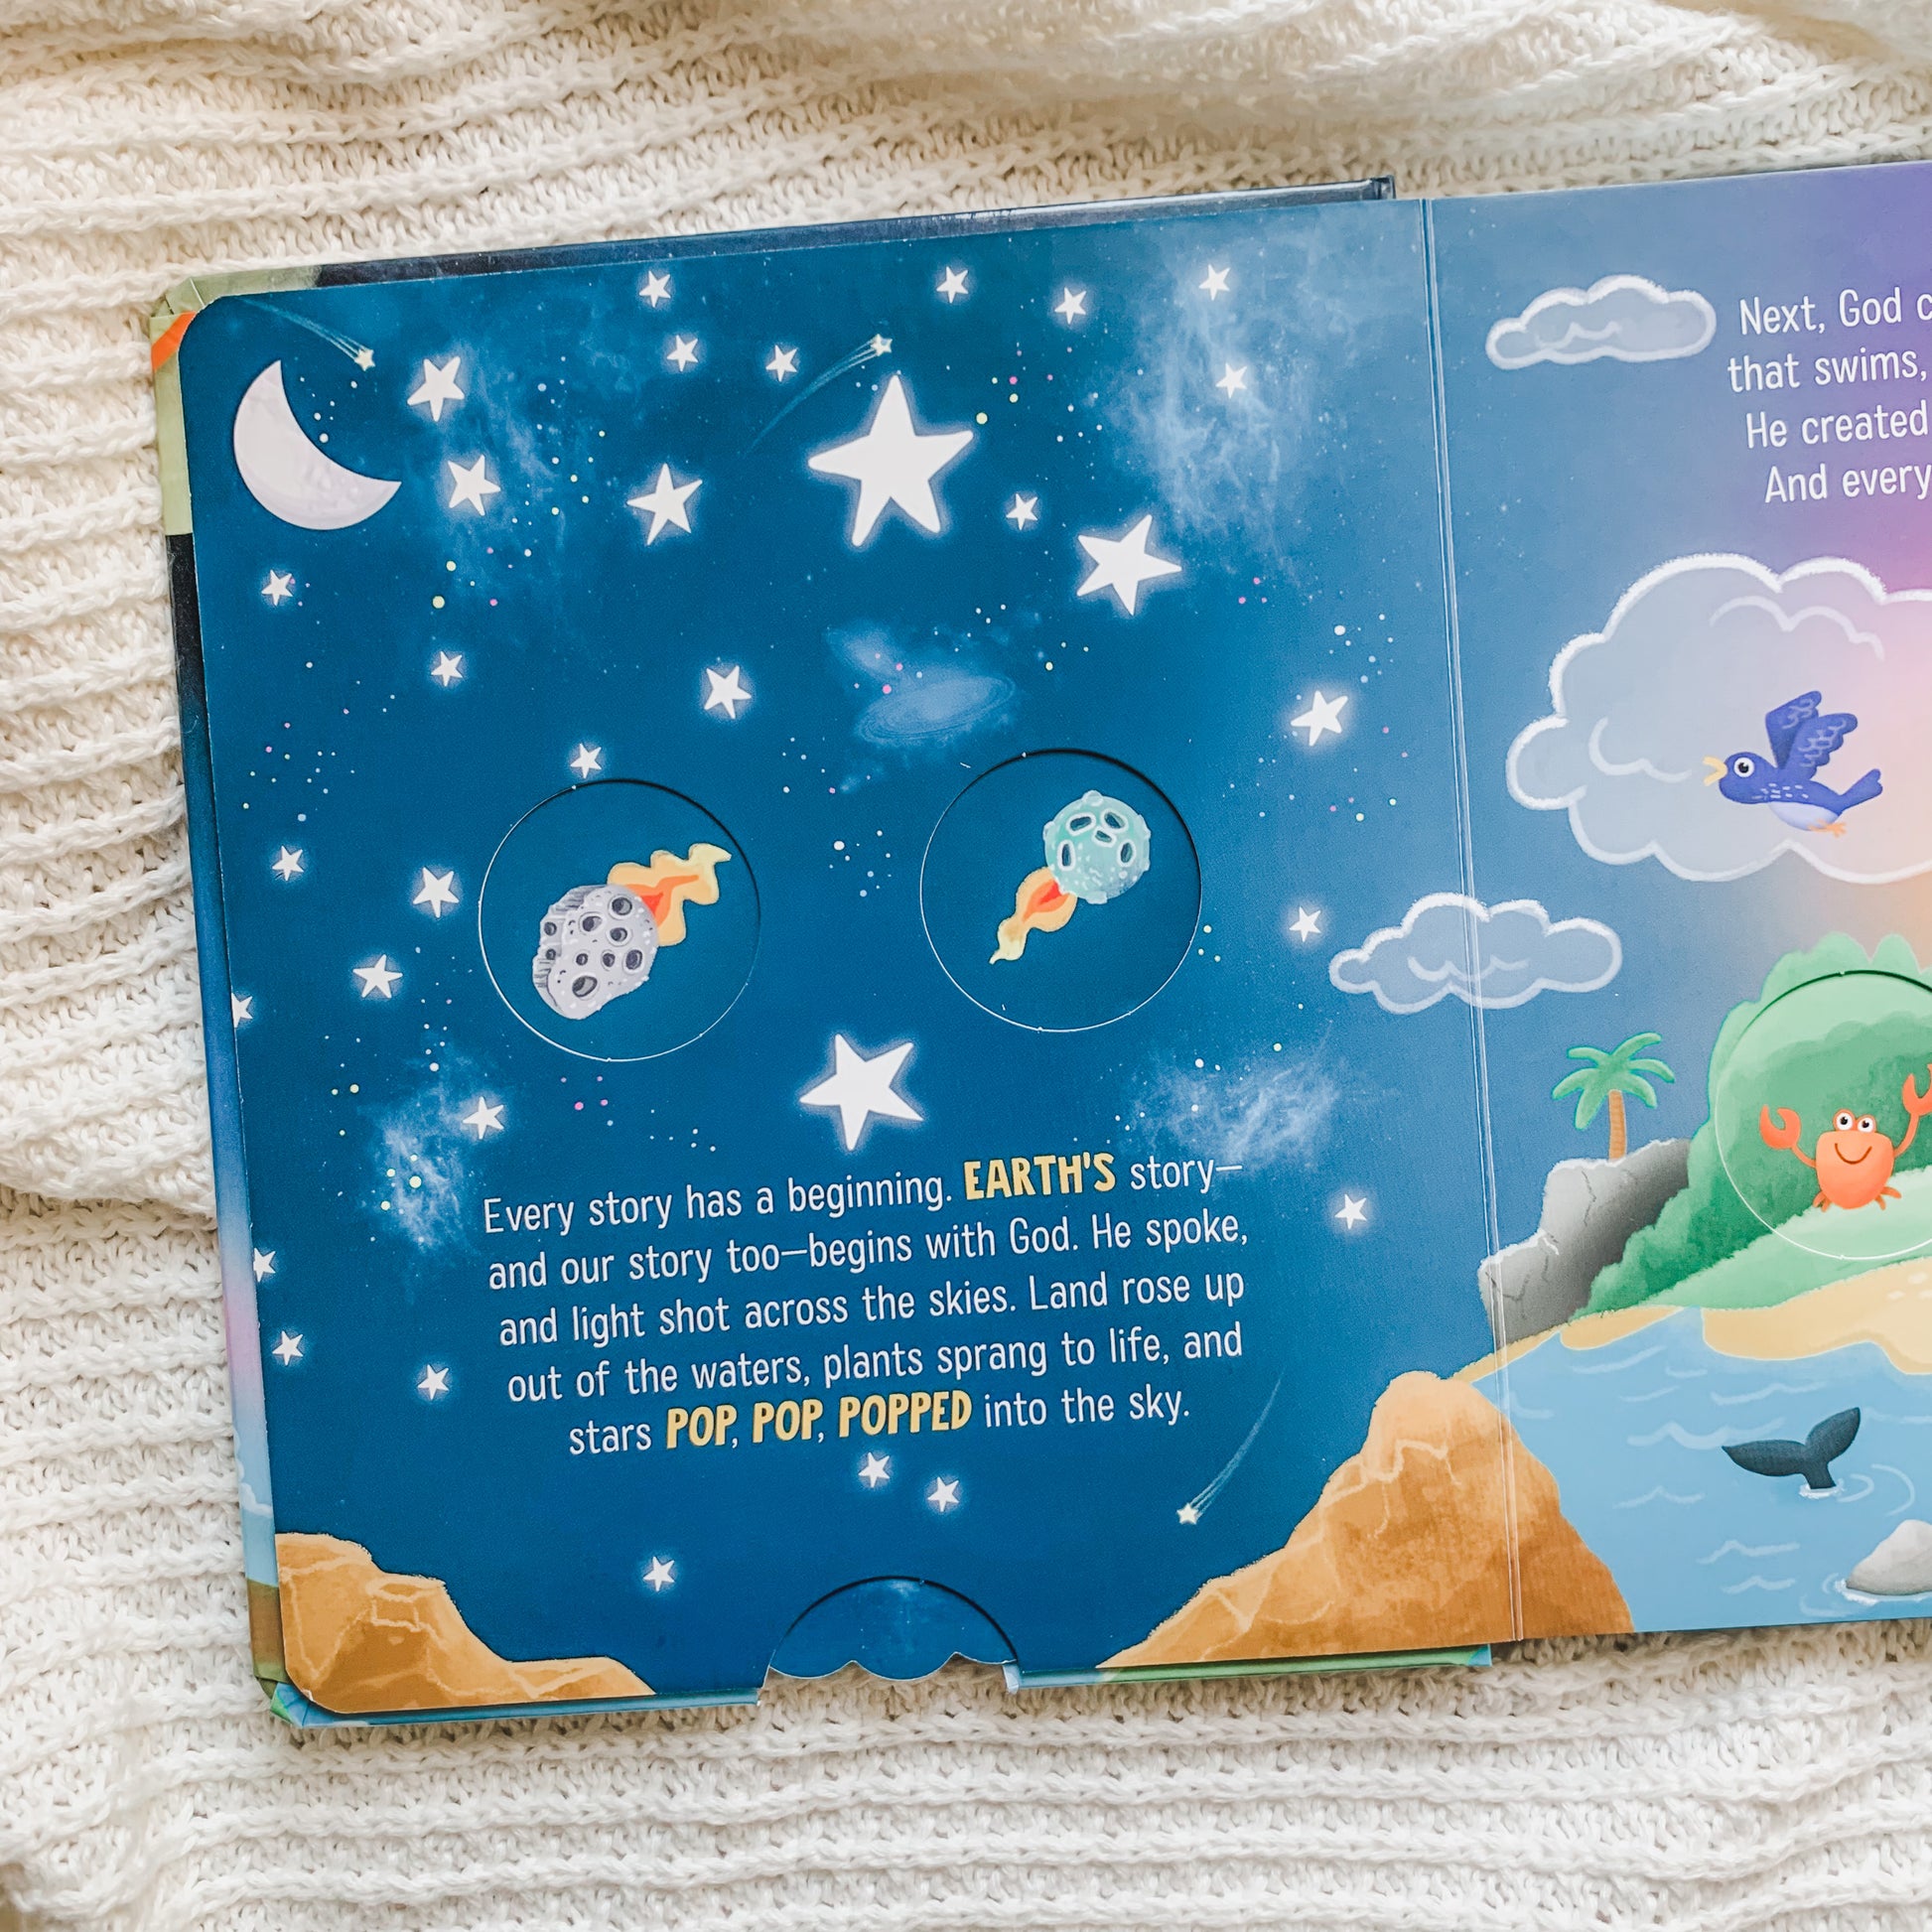 Indescribable for Little Ones [Book]